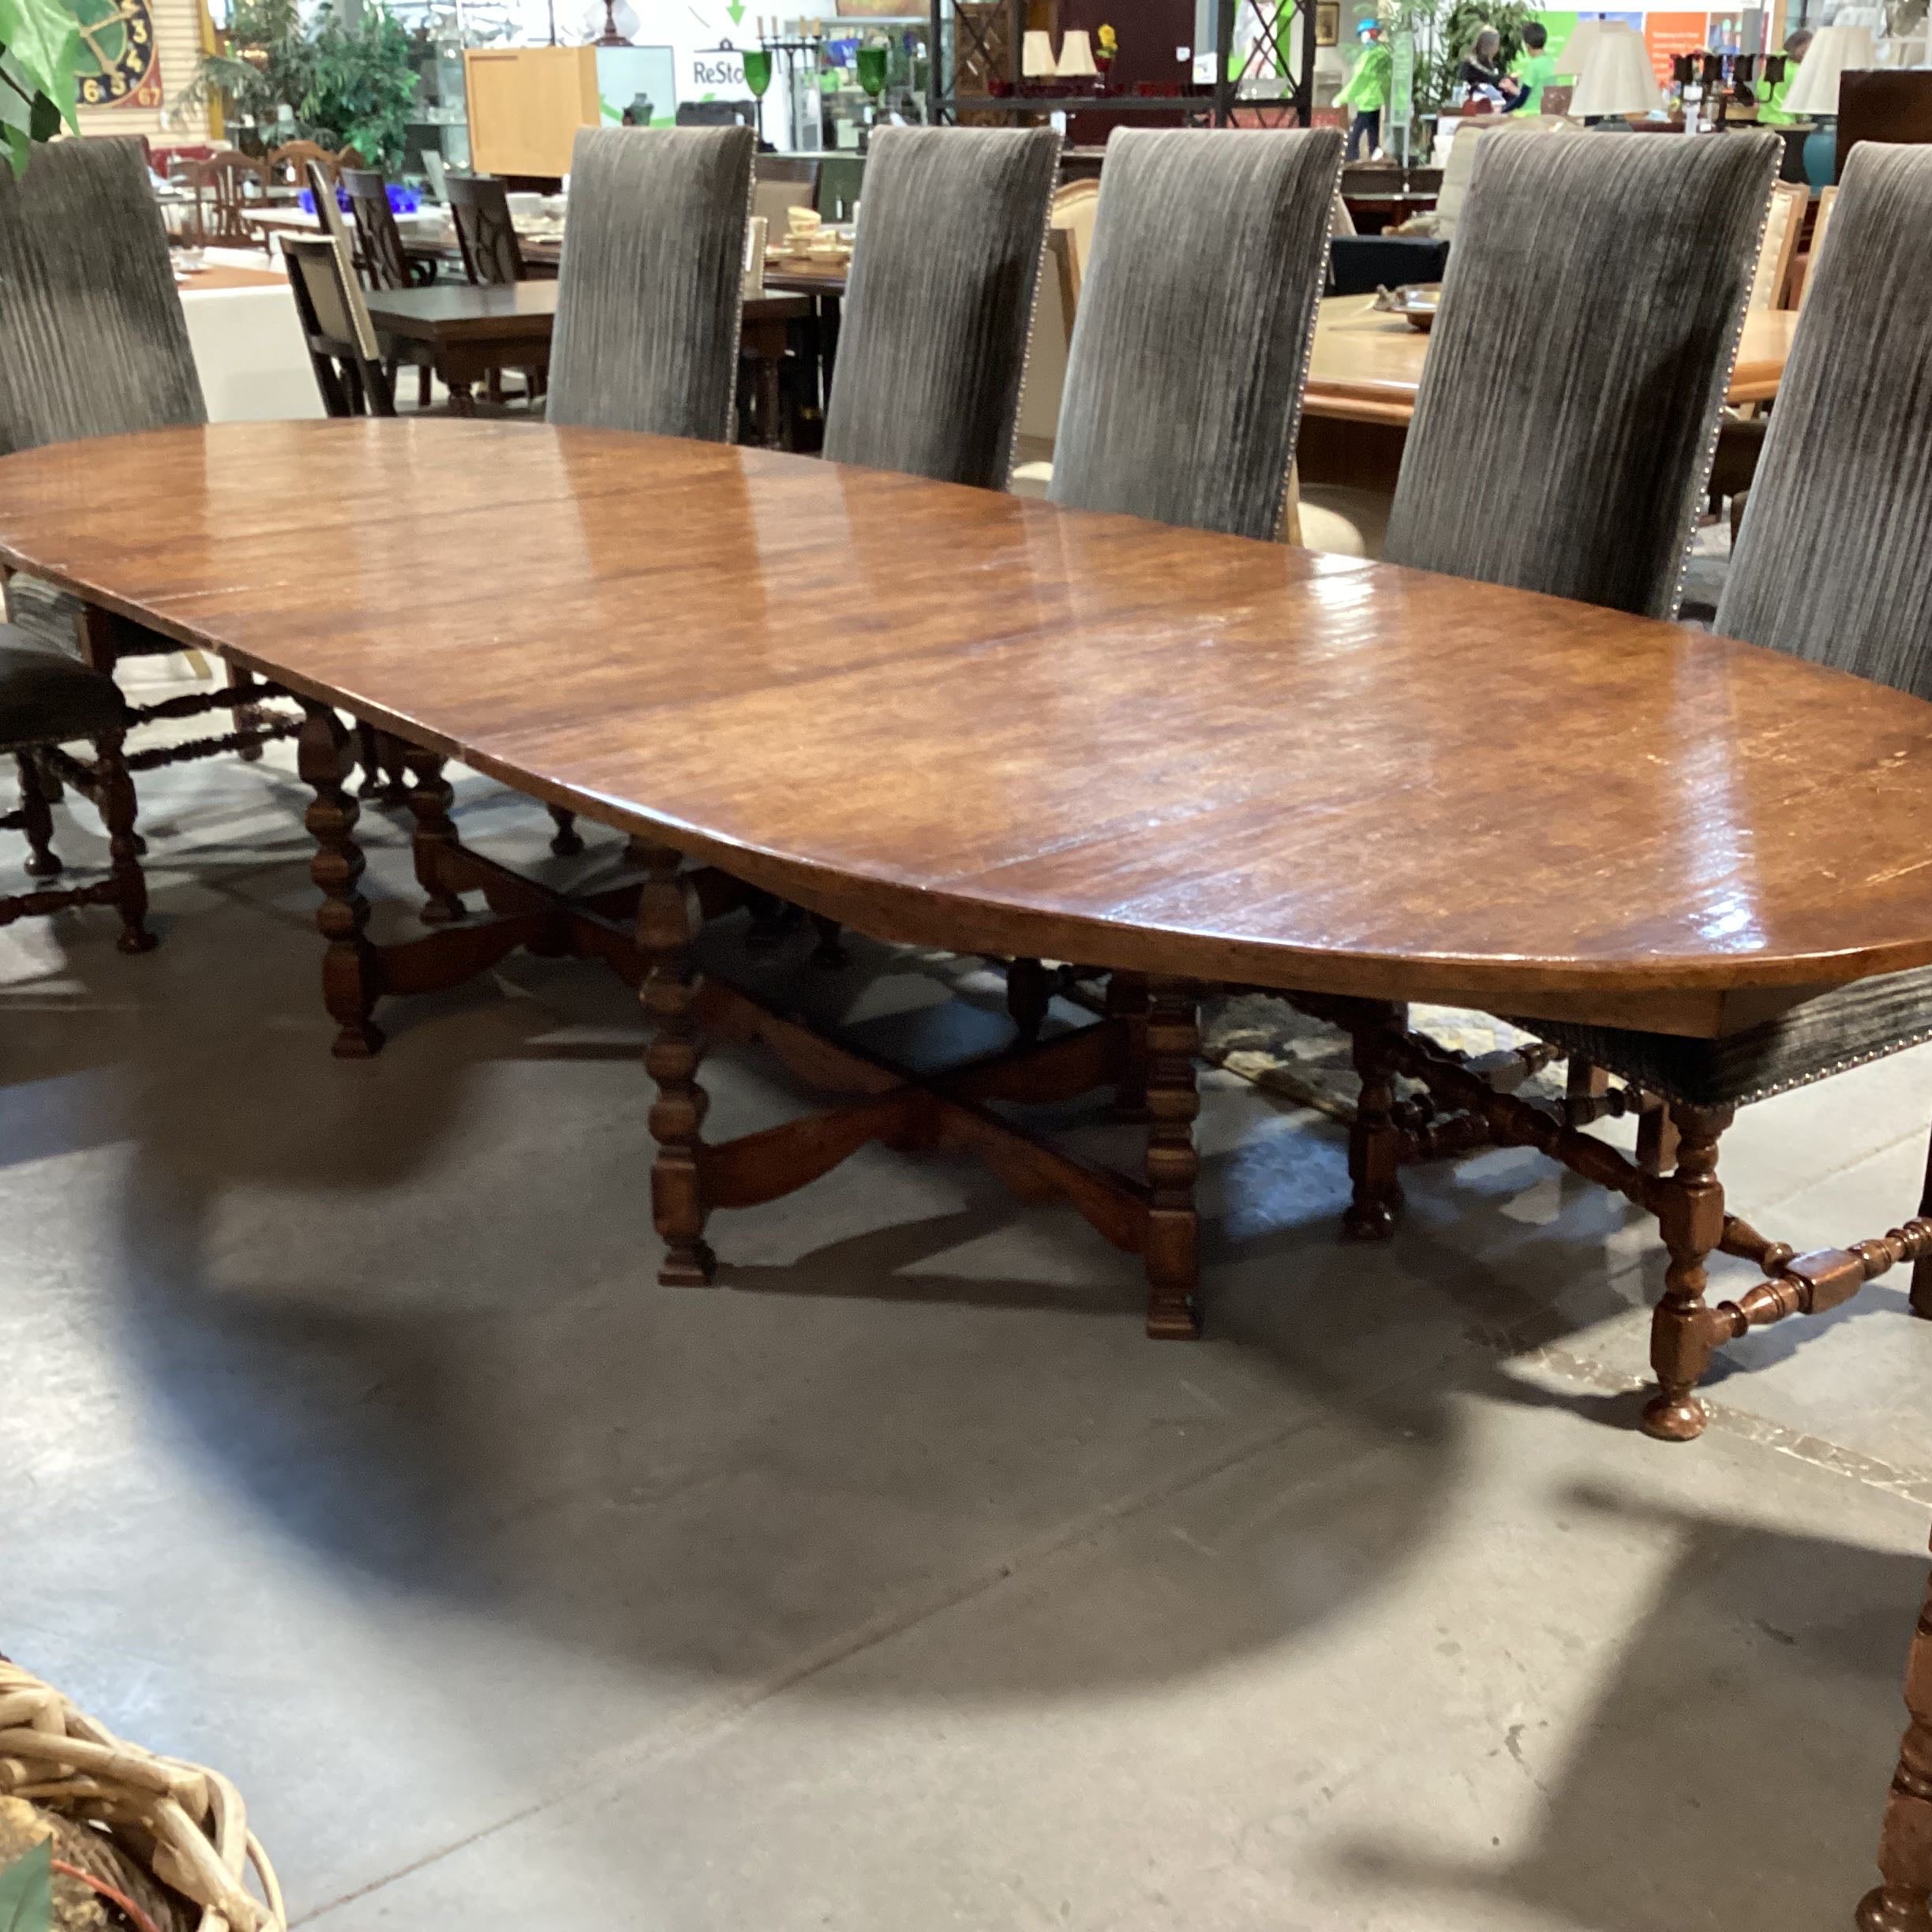 Dennis & Leen Ornate Carved Table with 12 Chairs Dining Set